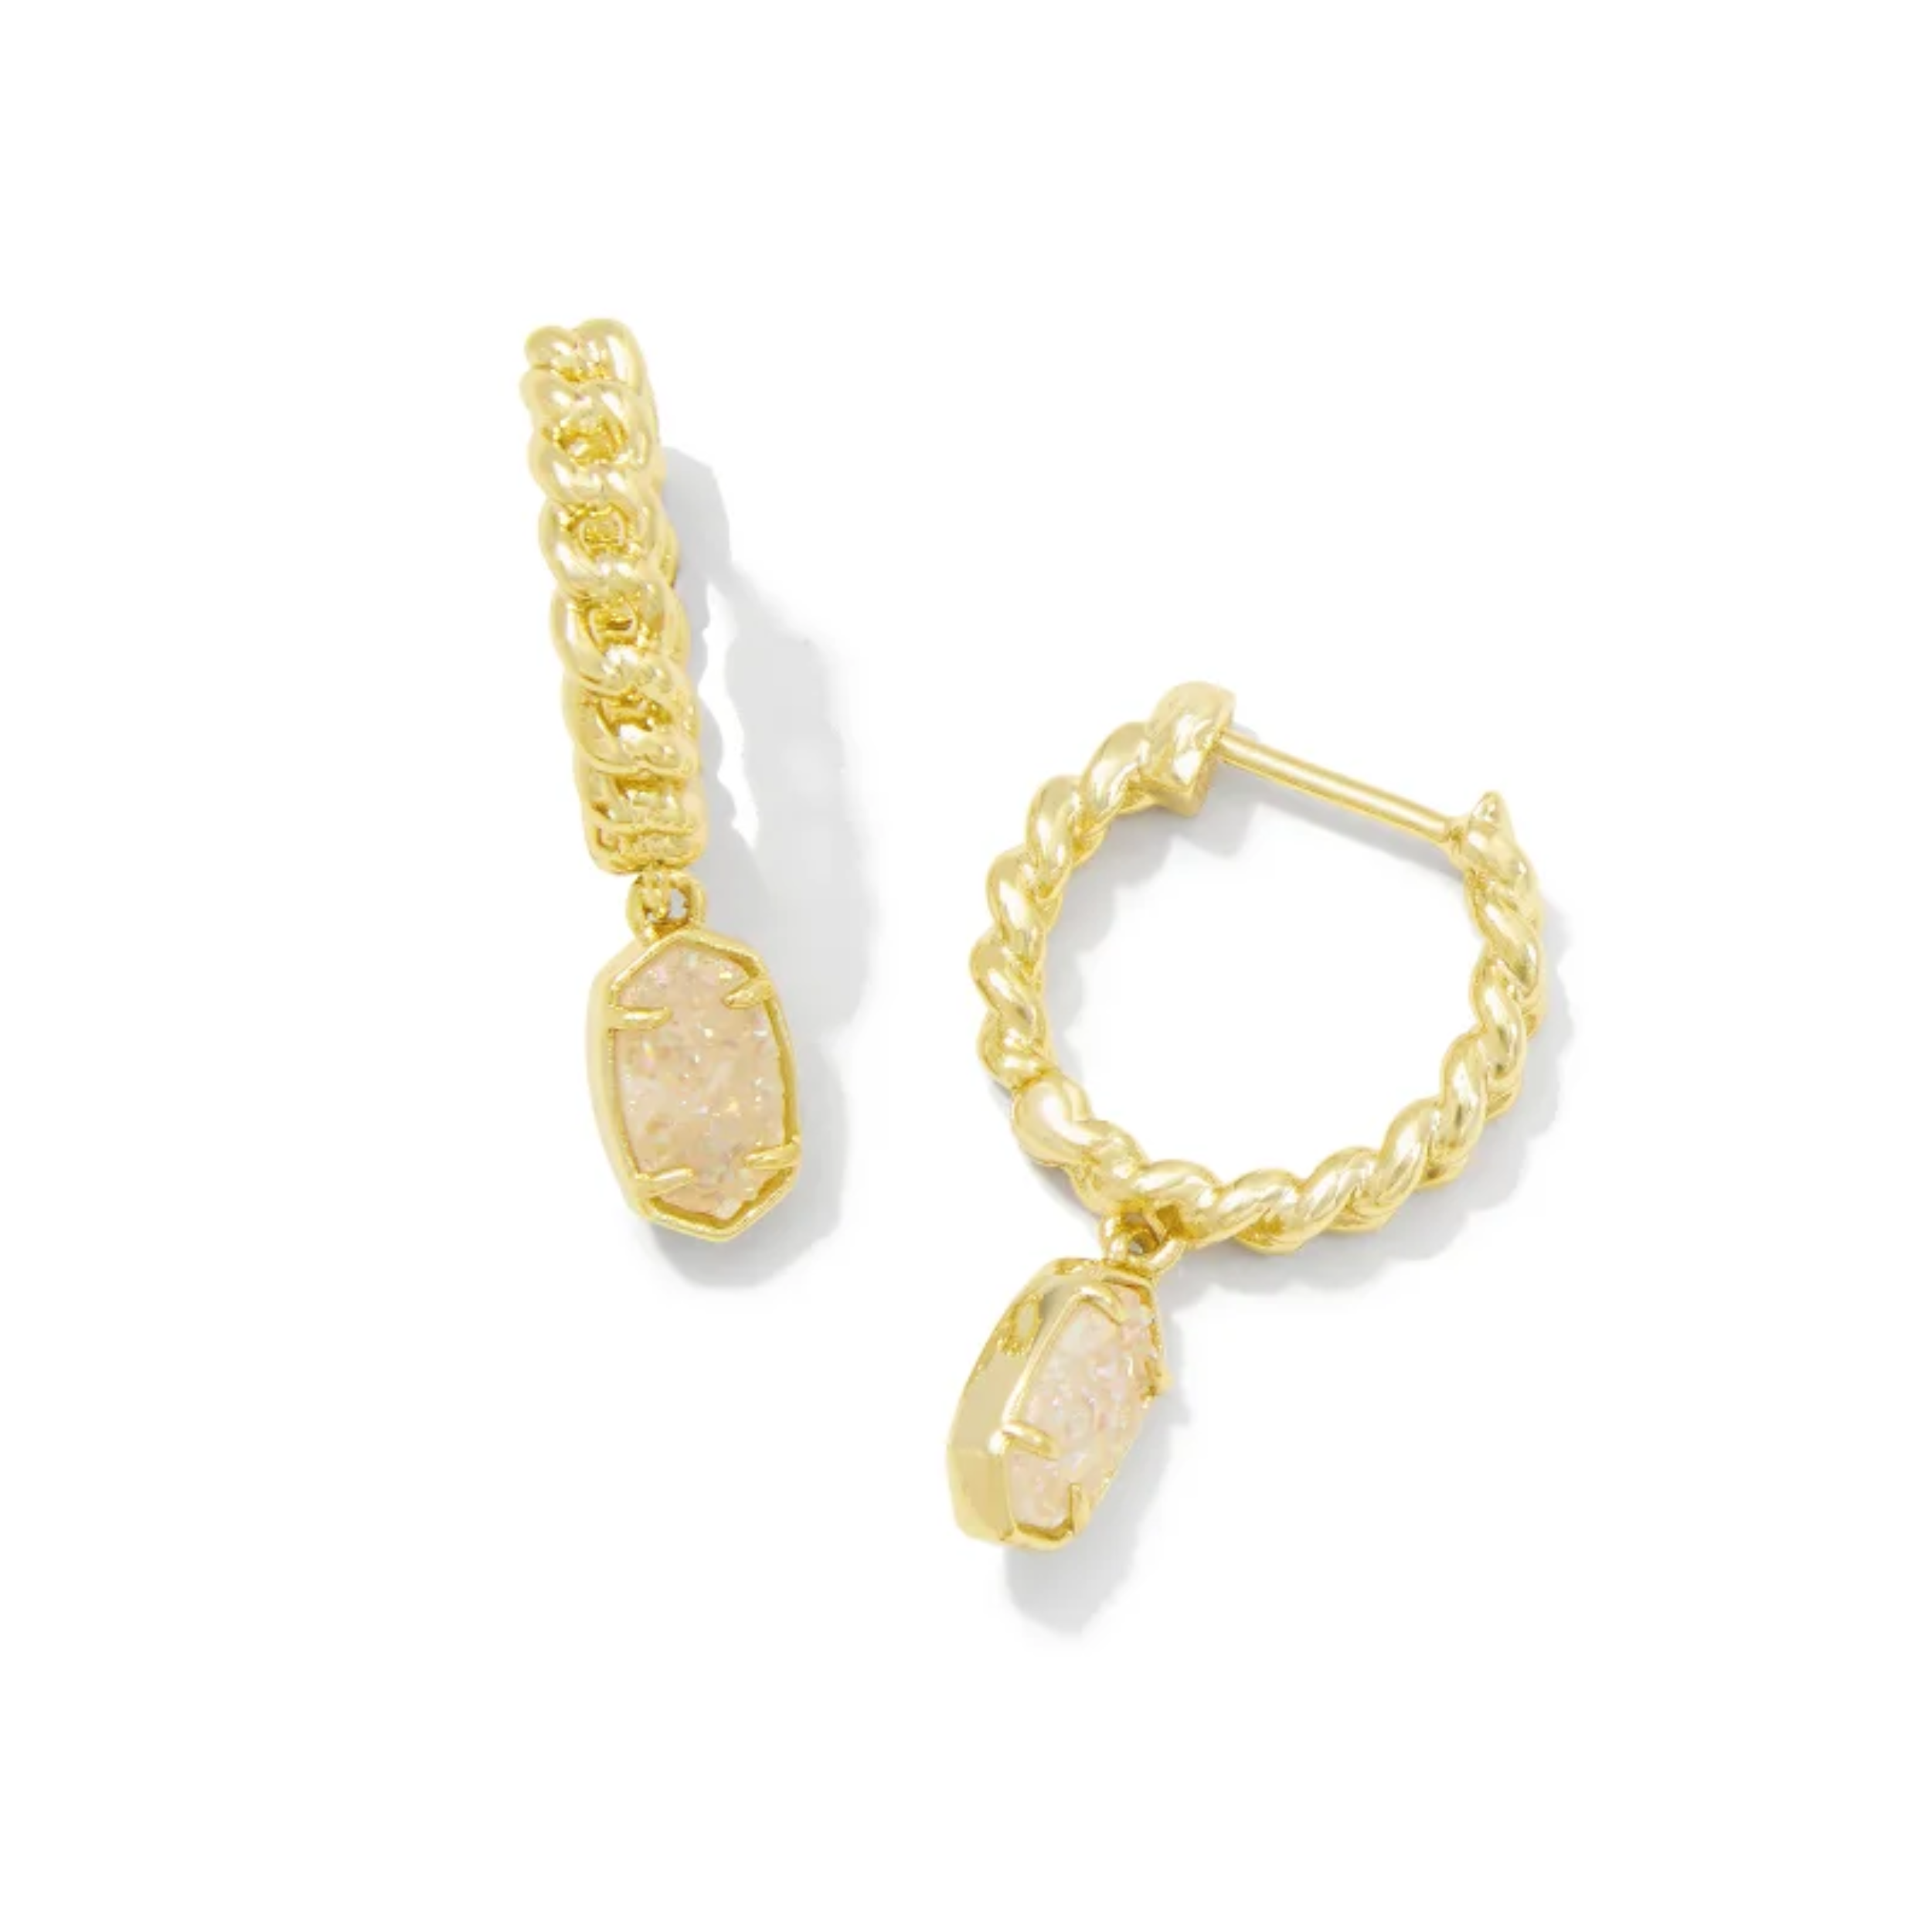 These Emilie Gold Huggie Earrings in Iridescent Drusy by Kendra Scott are pictured on a white background.